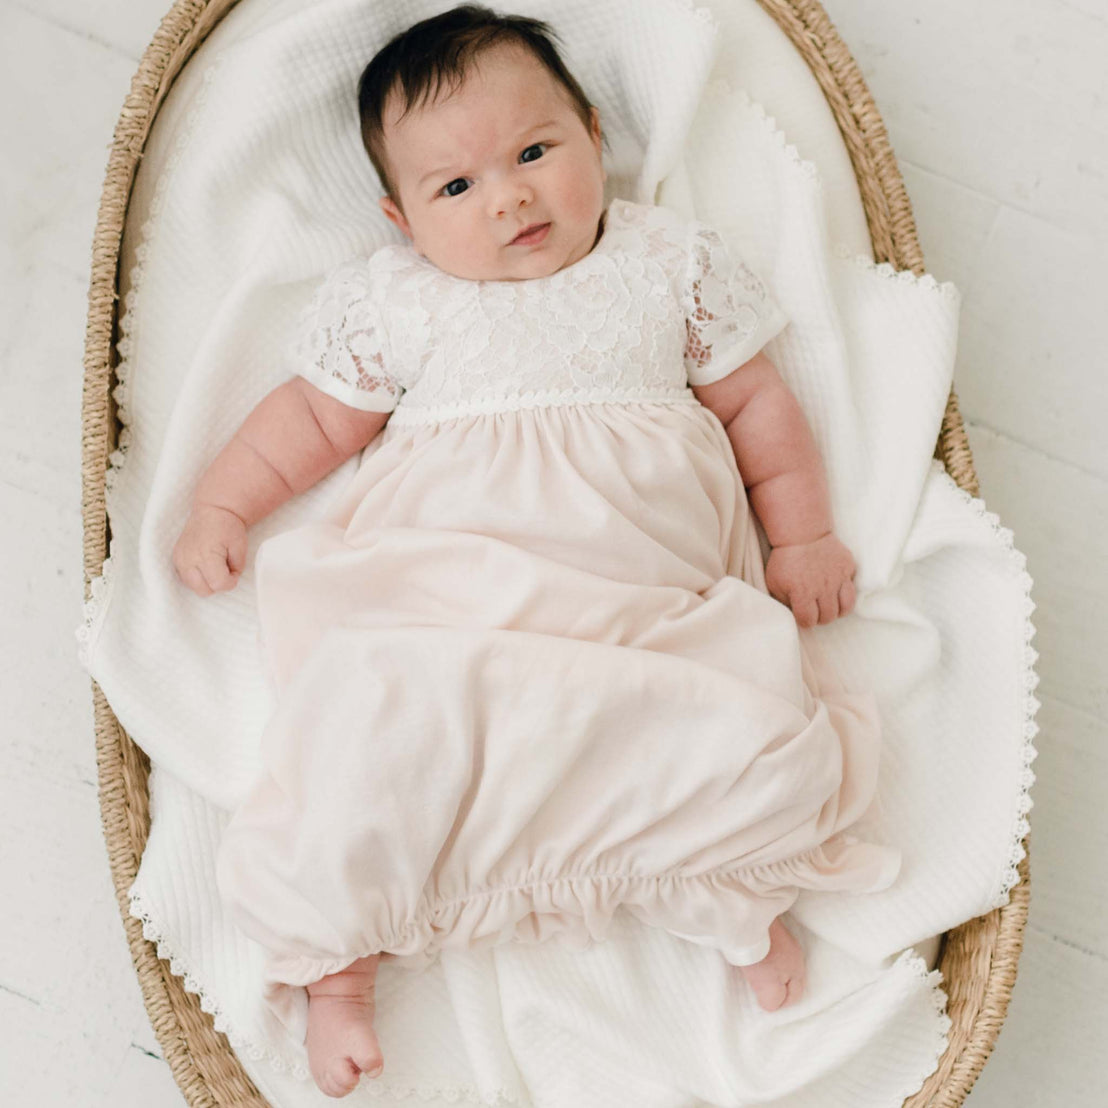 A content Rose Layette & Bonnet baby in a traditional pink dress with lace details lying in a woven basket, looking directly at the camera with a subtle smile.